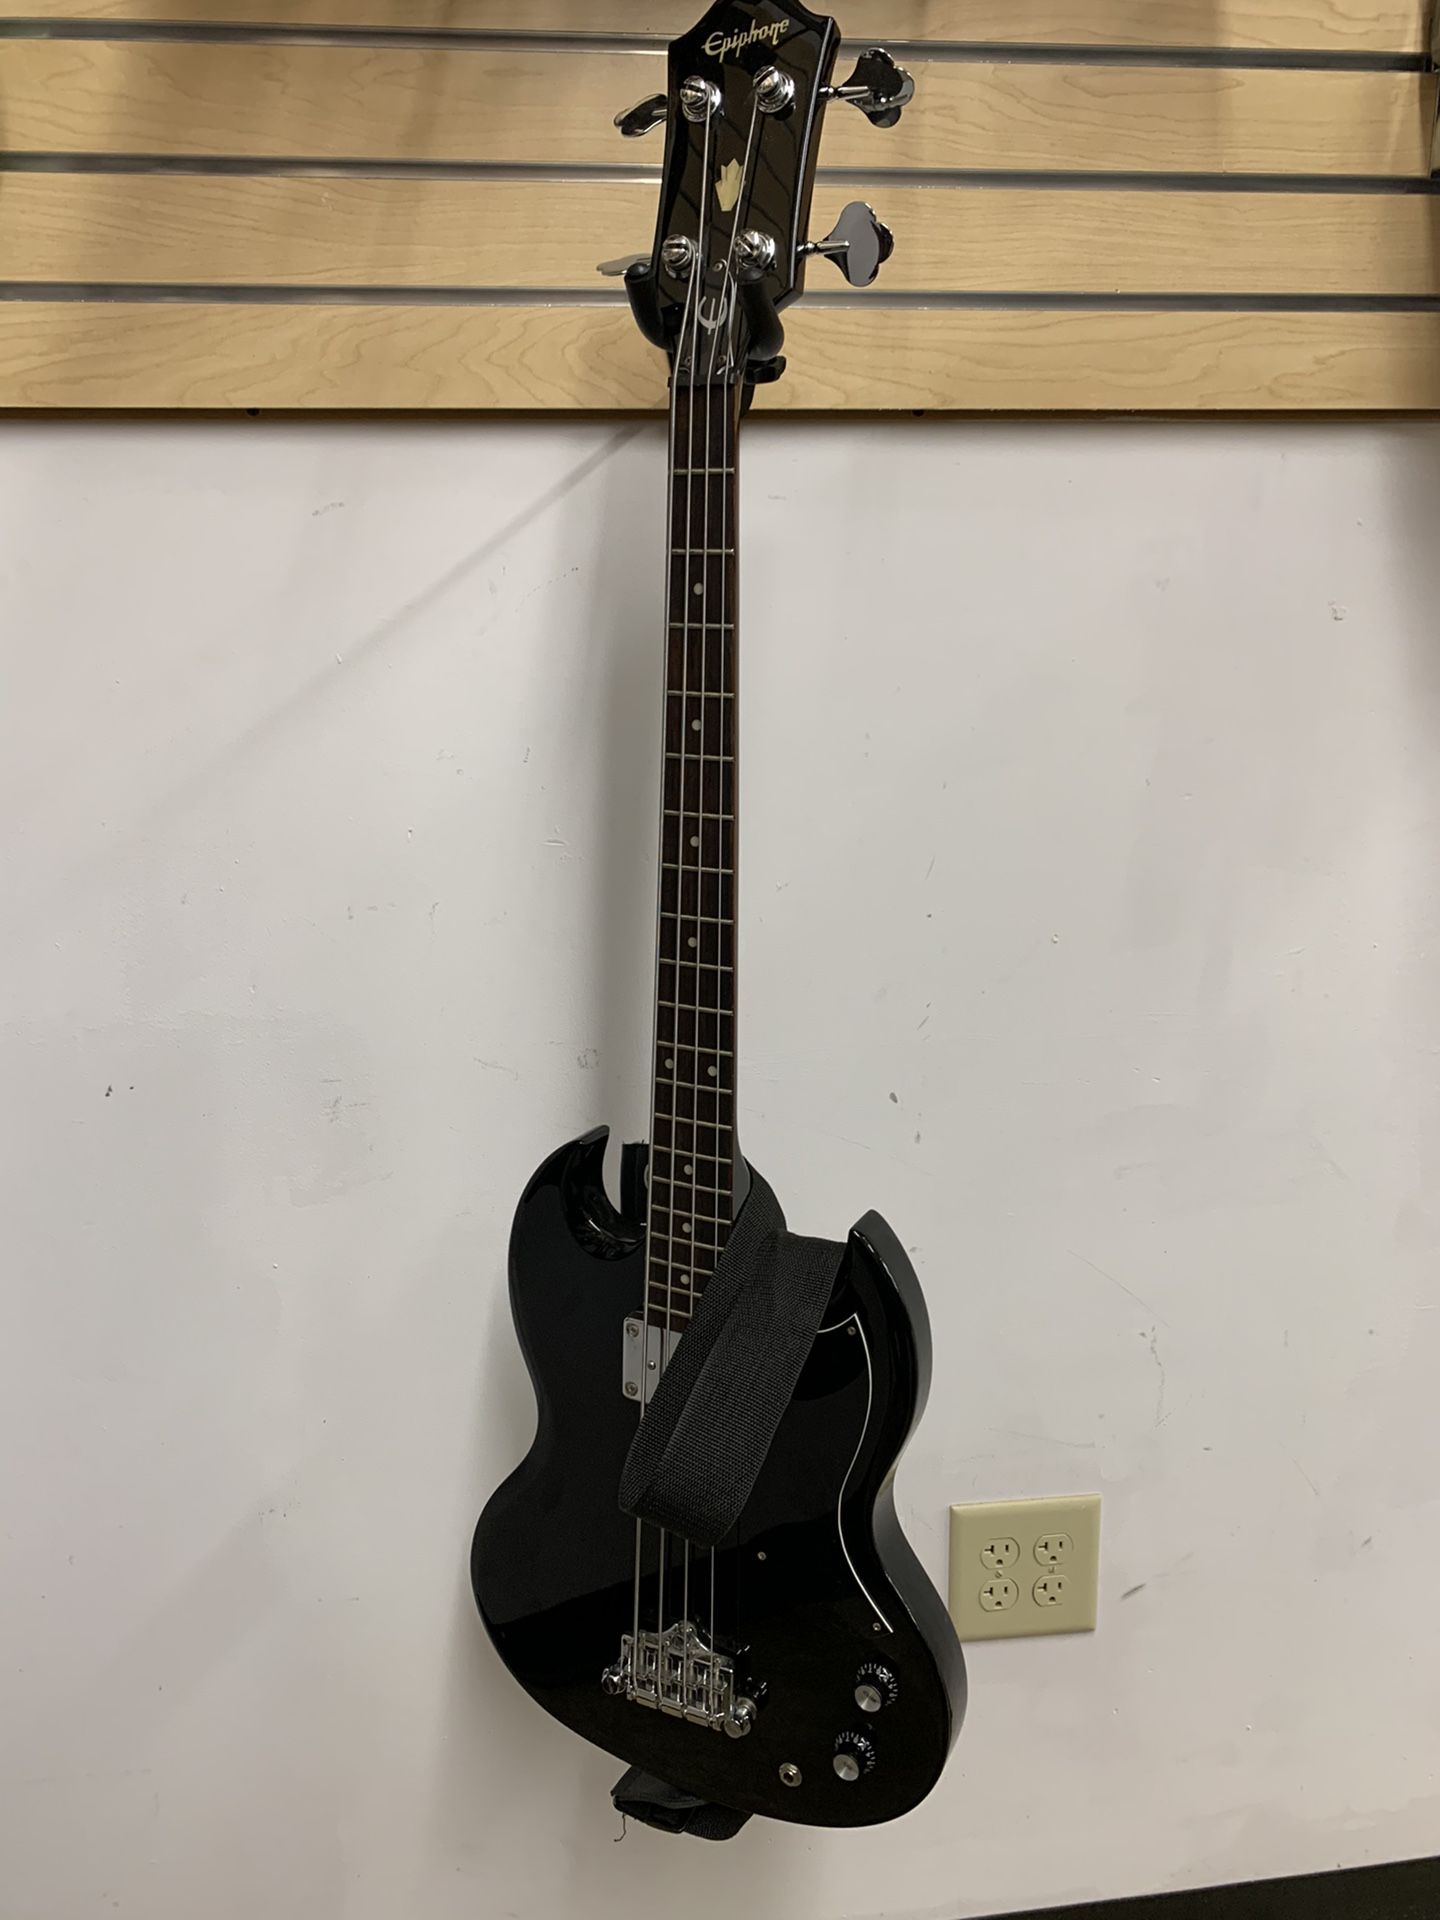 Epiphone 4- string Bass Guitar with case